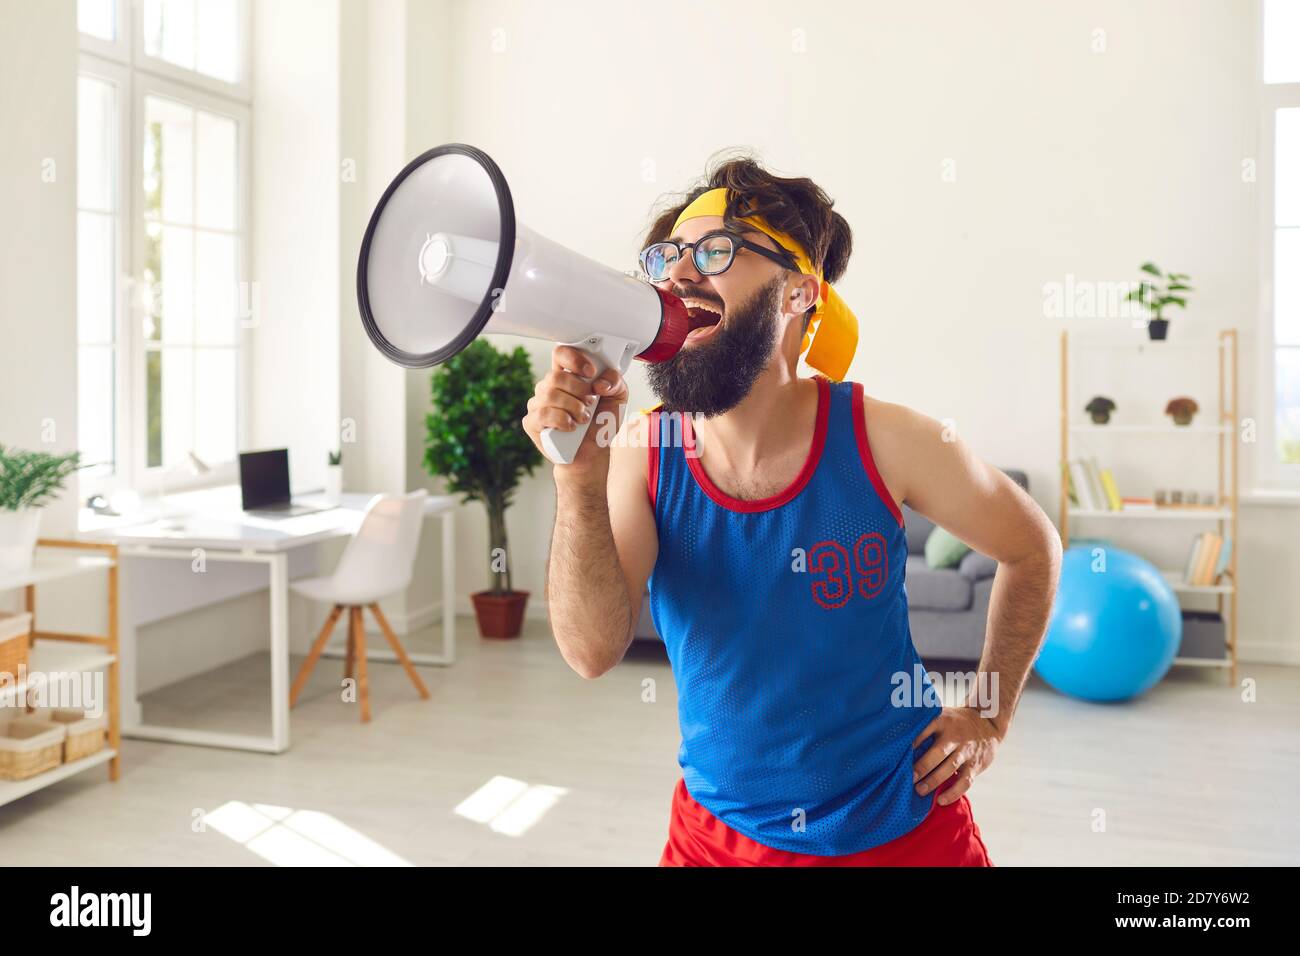 Funny bearded male trainer loudly shouts into a loudspeaker urging everyone to do exercises. Stock Photo